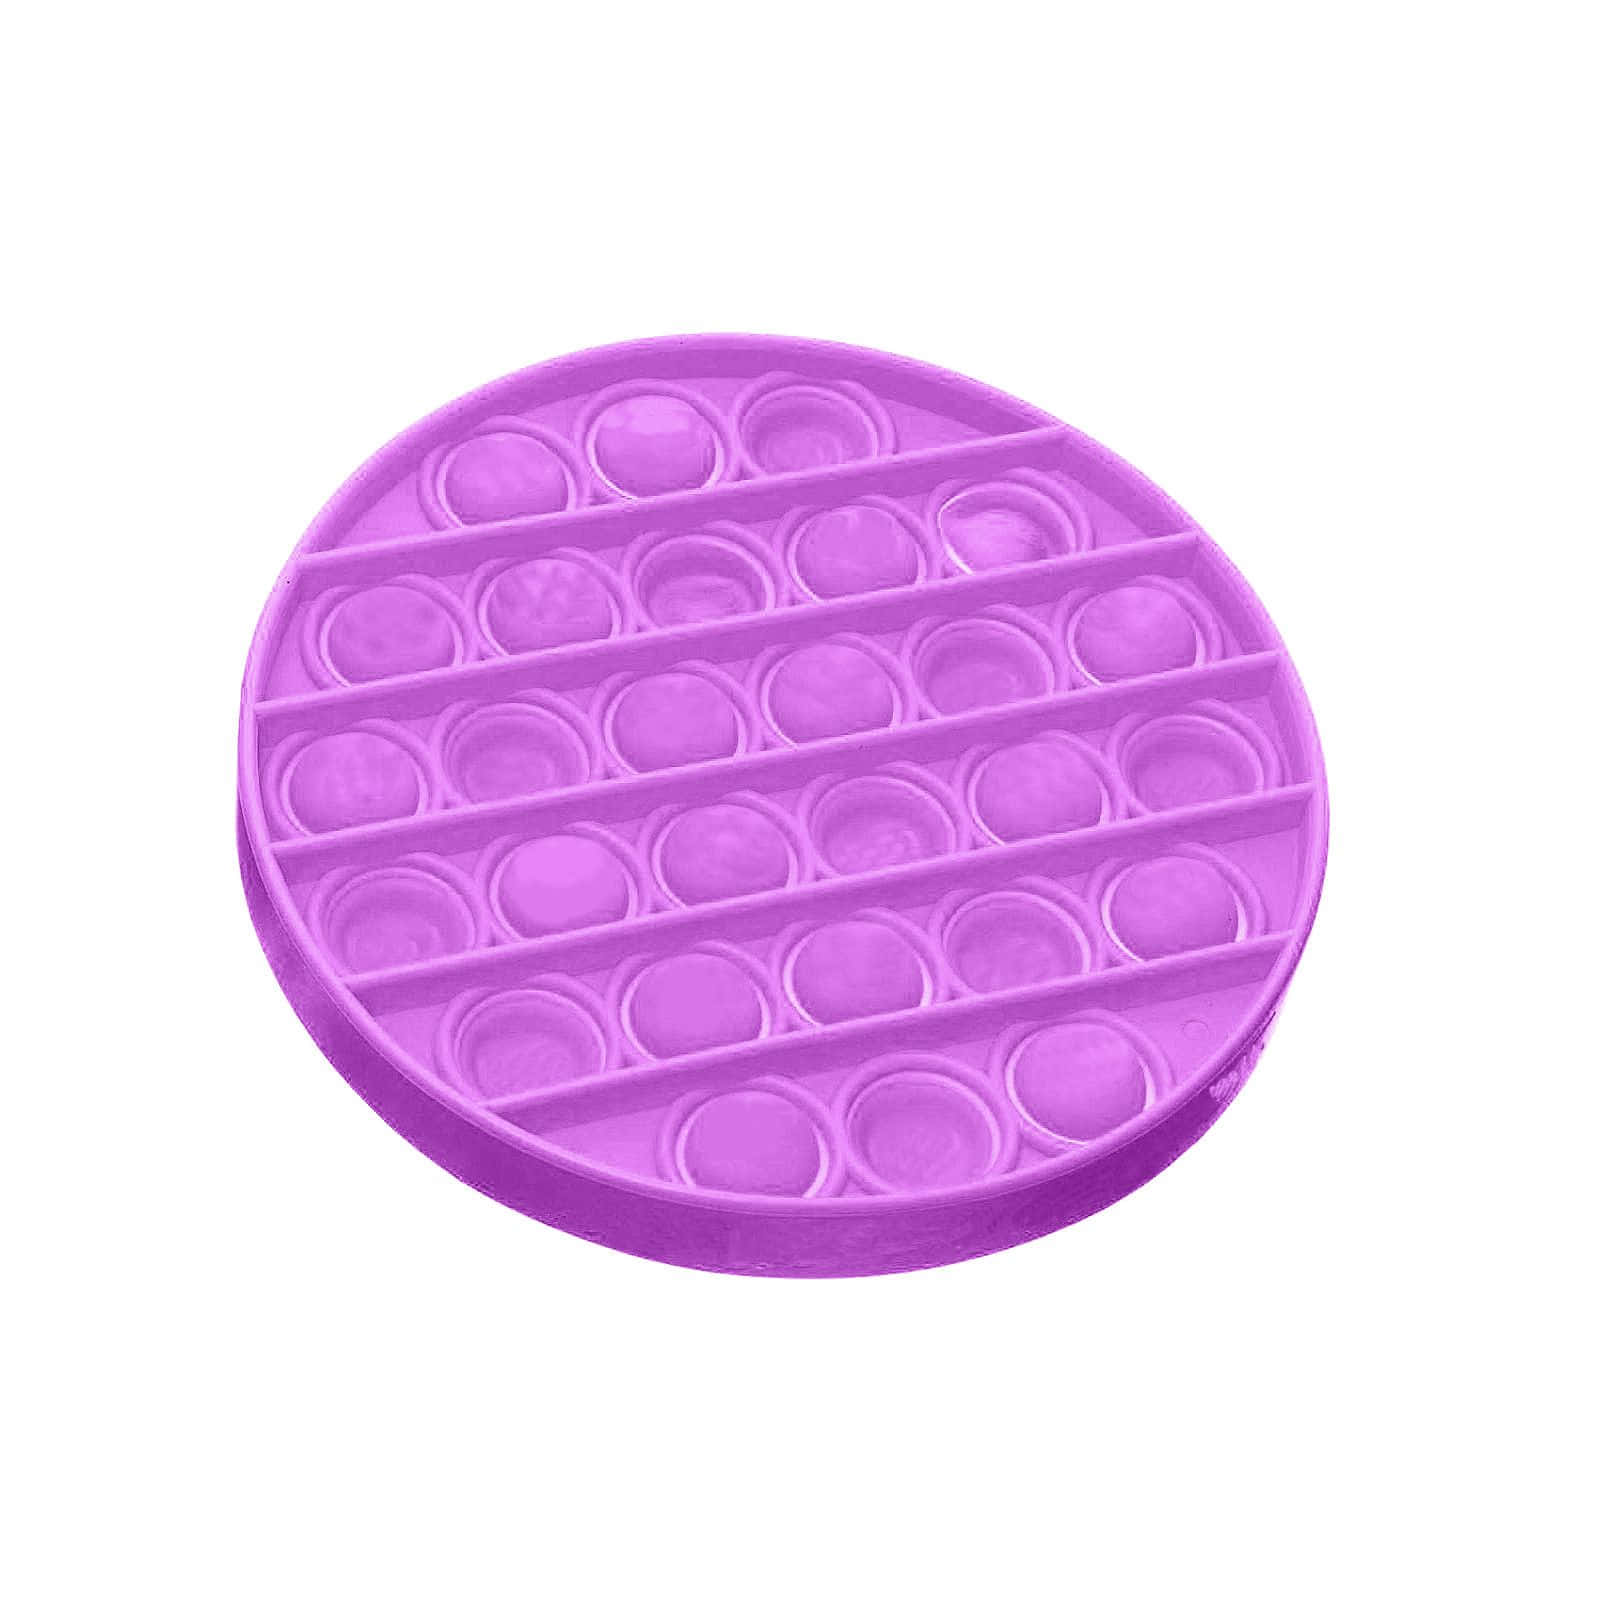 A Purple Plastic Tray With A Lot Of Holes